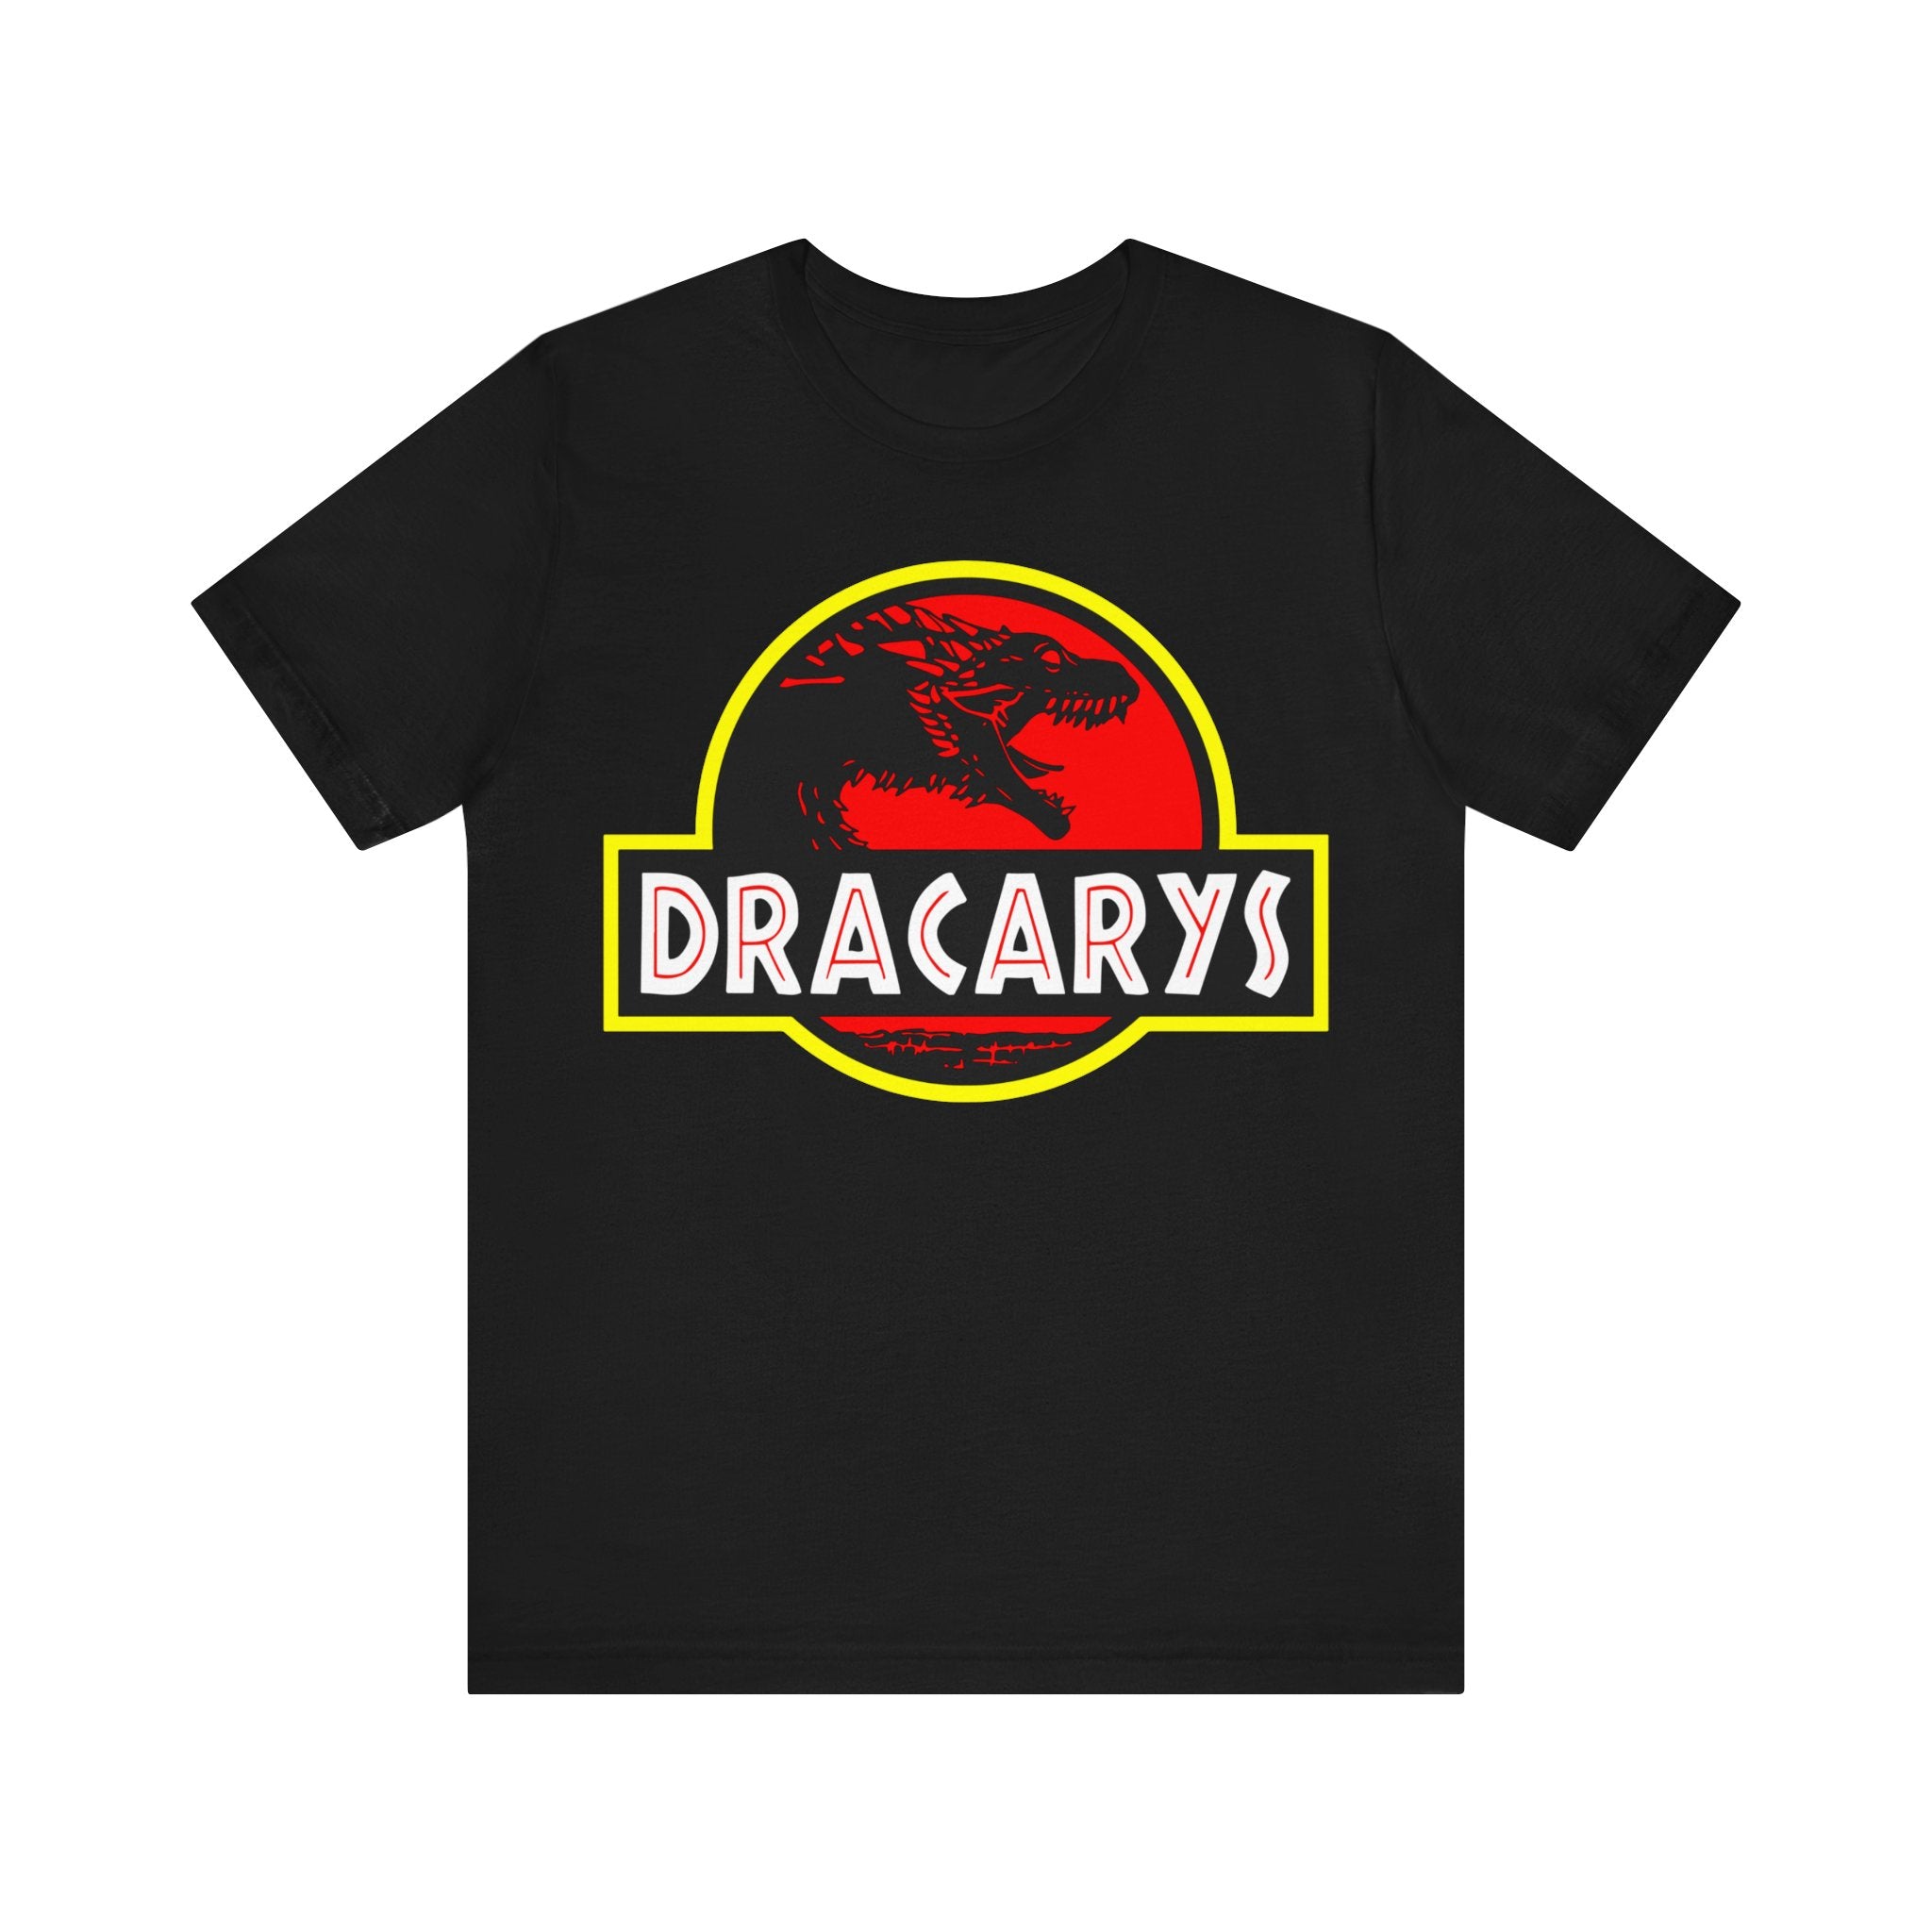 Sentence with product name: Dracarys T-Shirt featuring a circular red and yellow quality print with a silhouette of a dragon and the word "dracarys" in bold yellow letters.